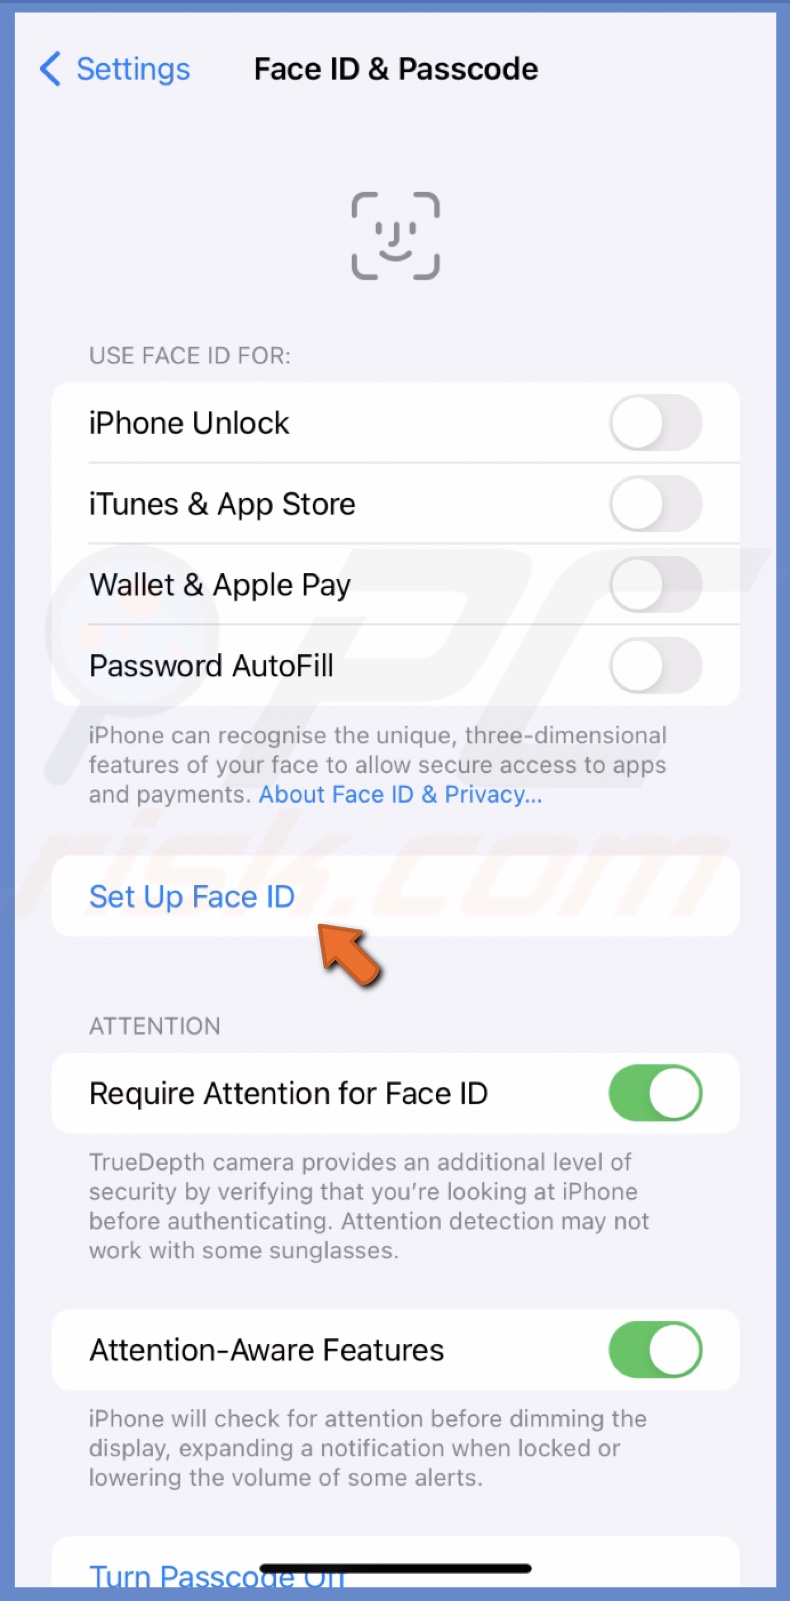 Tap Set Up Face ID